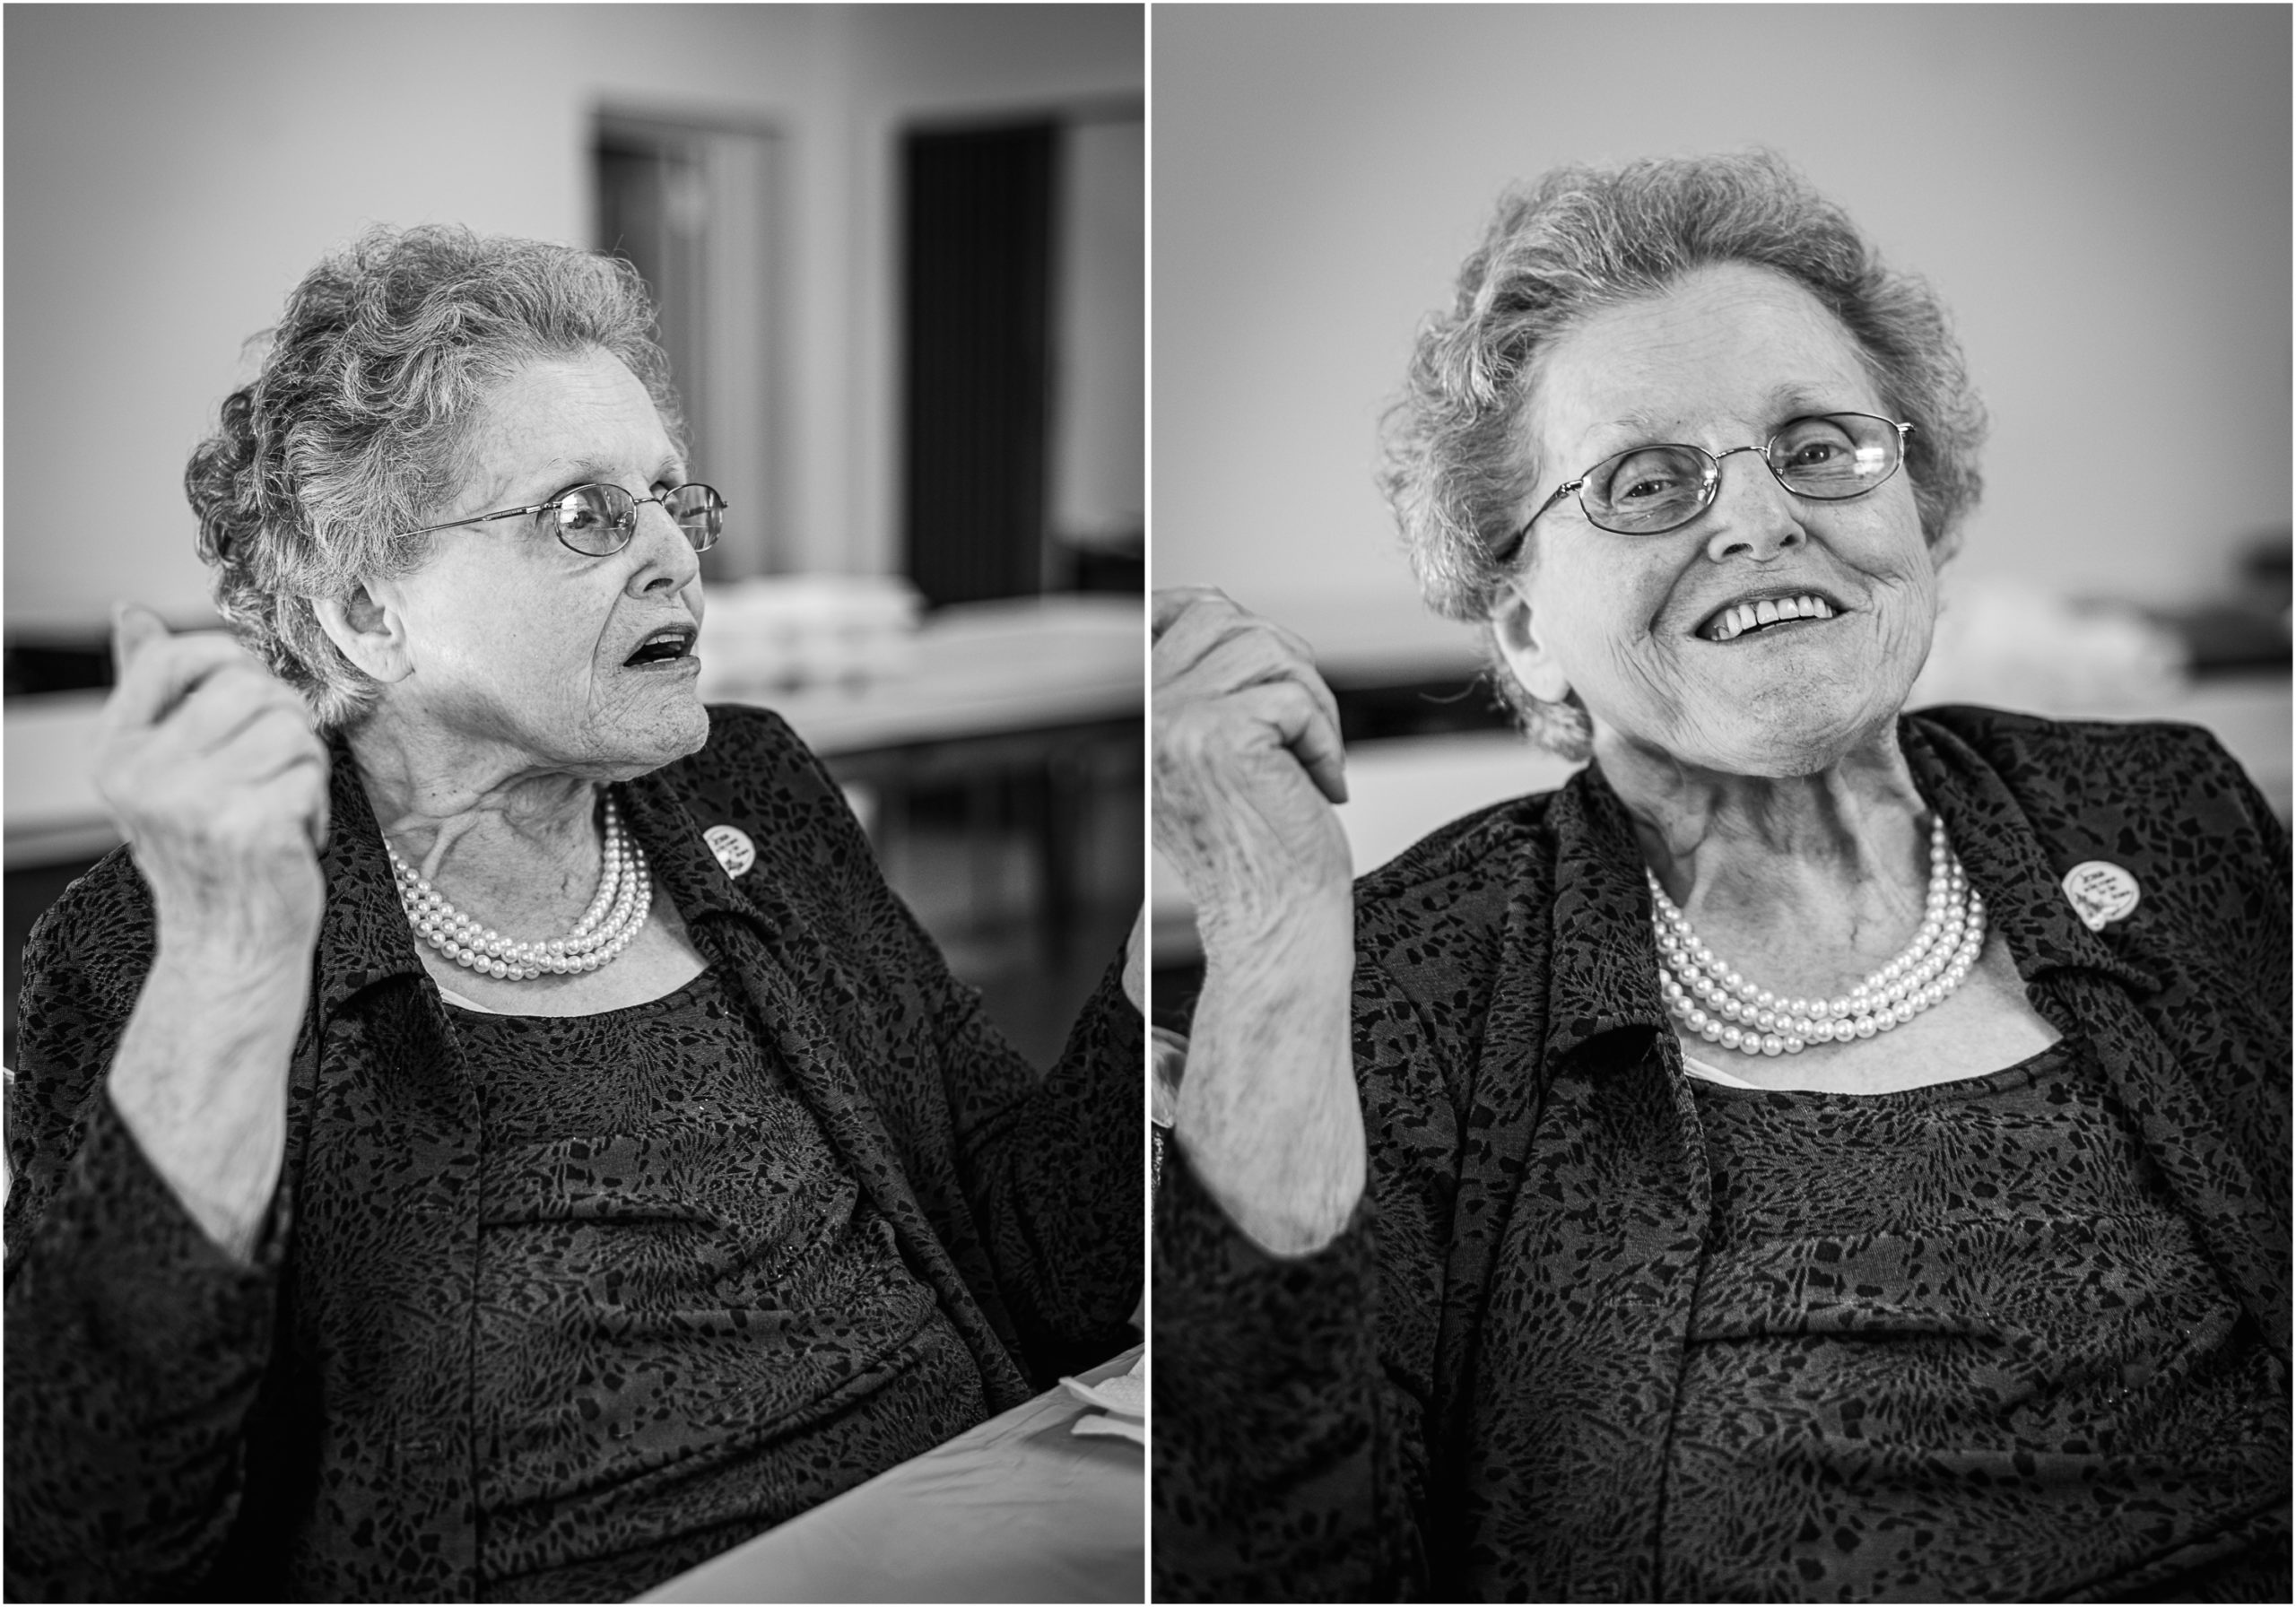 A collage of portraits of my grandmother on Christmas day.